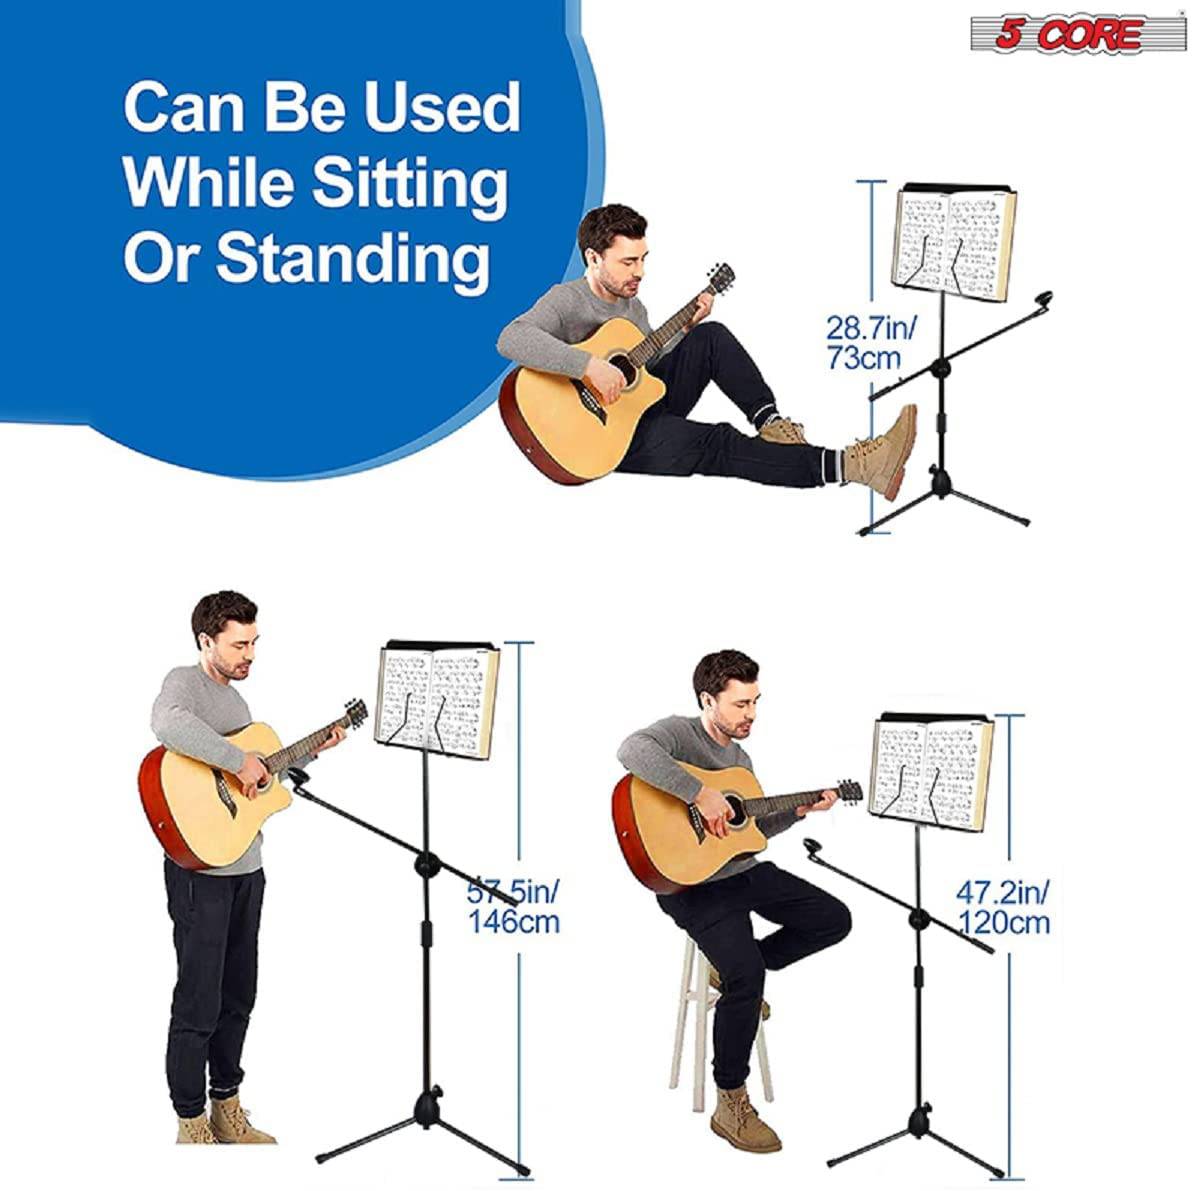 5 Core Sheet Music Stand With Mic Stand Holder - 3 IN 1 Professional